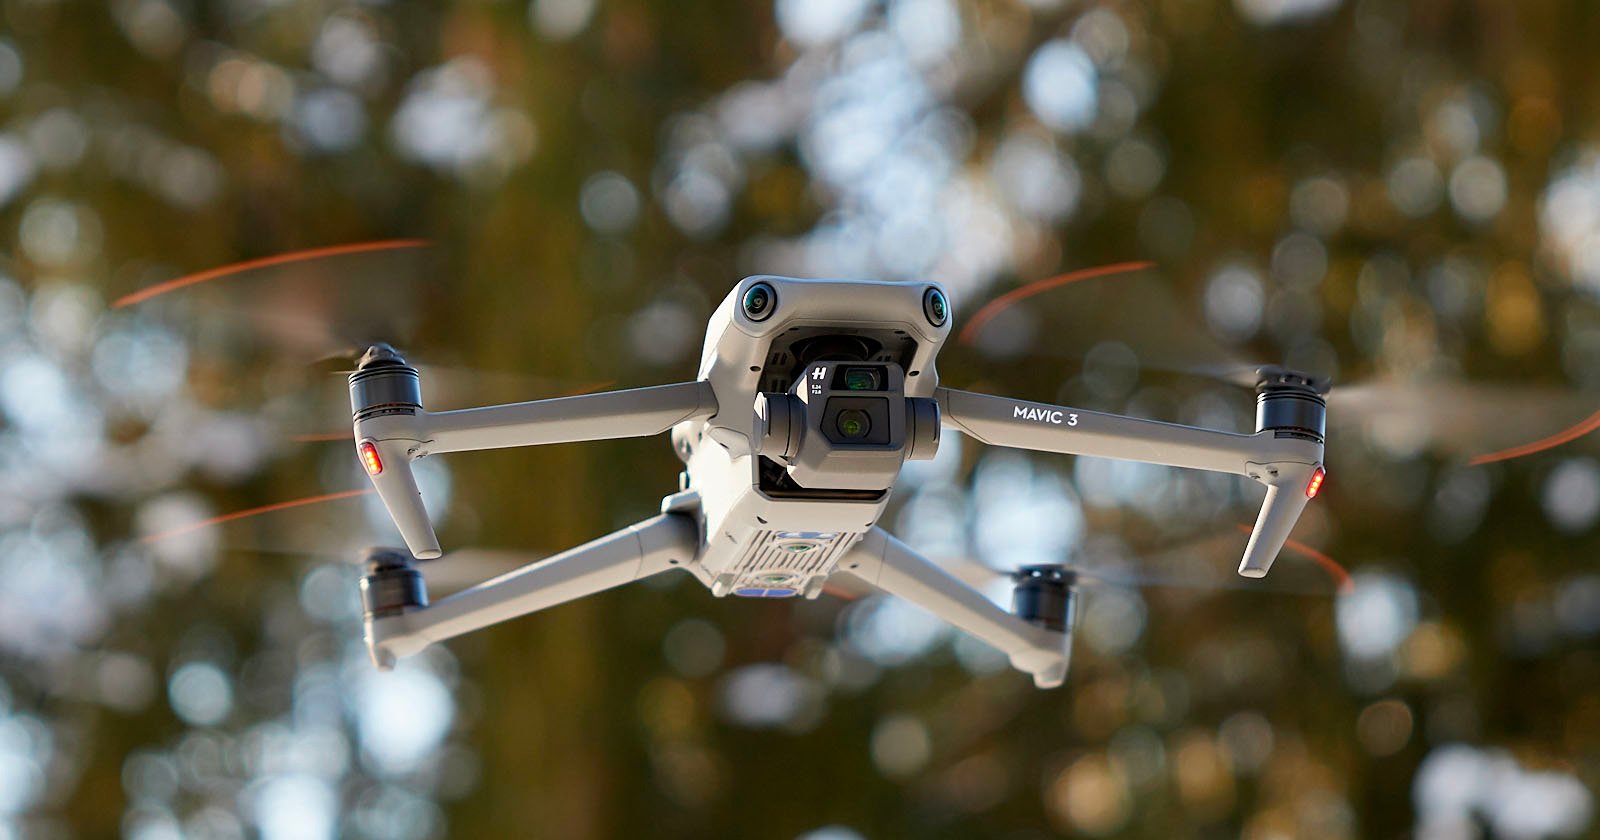 Ukrainians Say Russia is Still Tracking Their Drones with DJI AeroScope